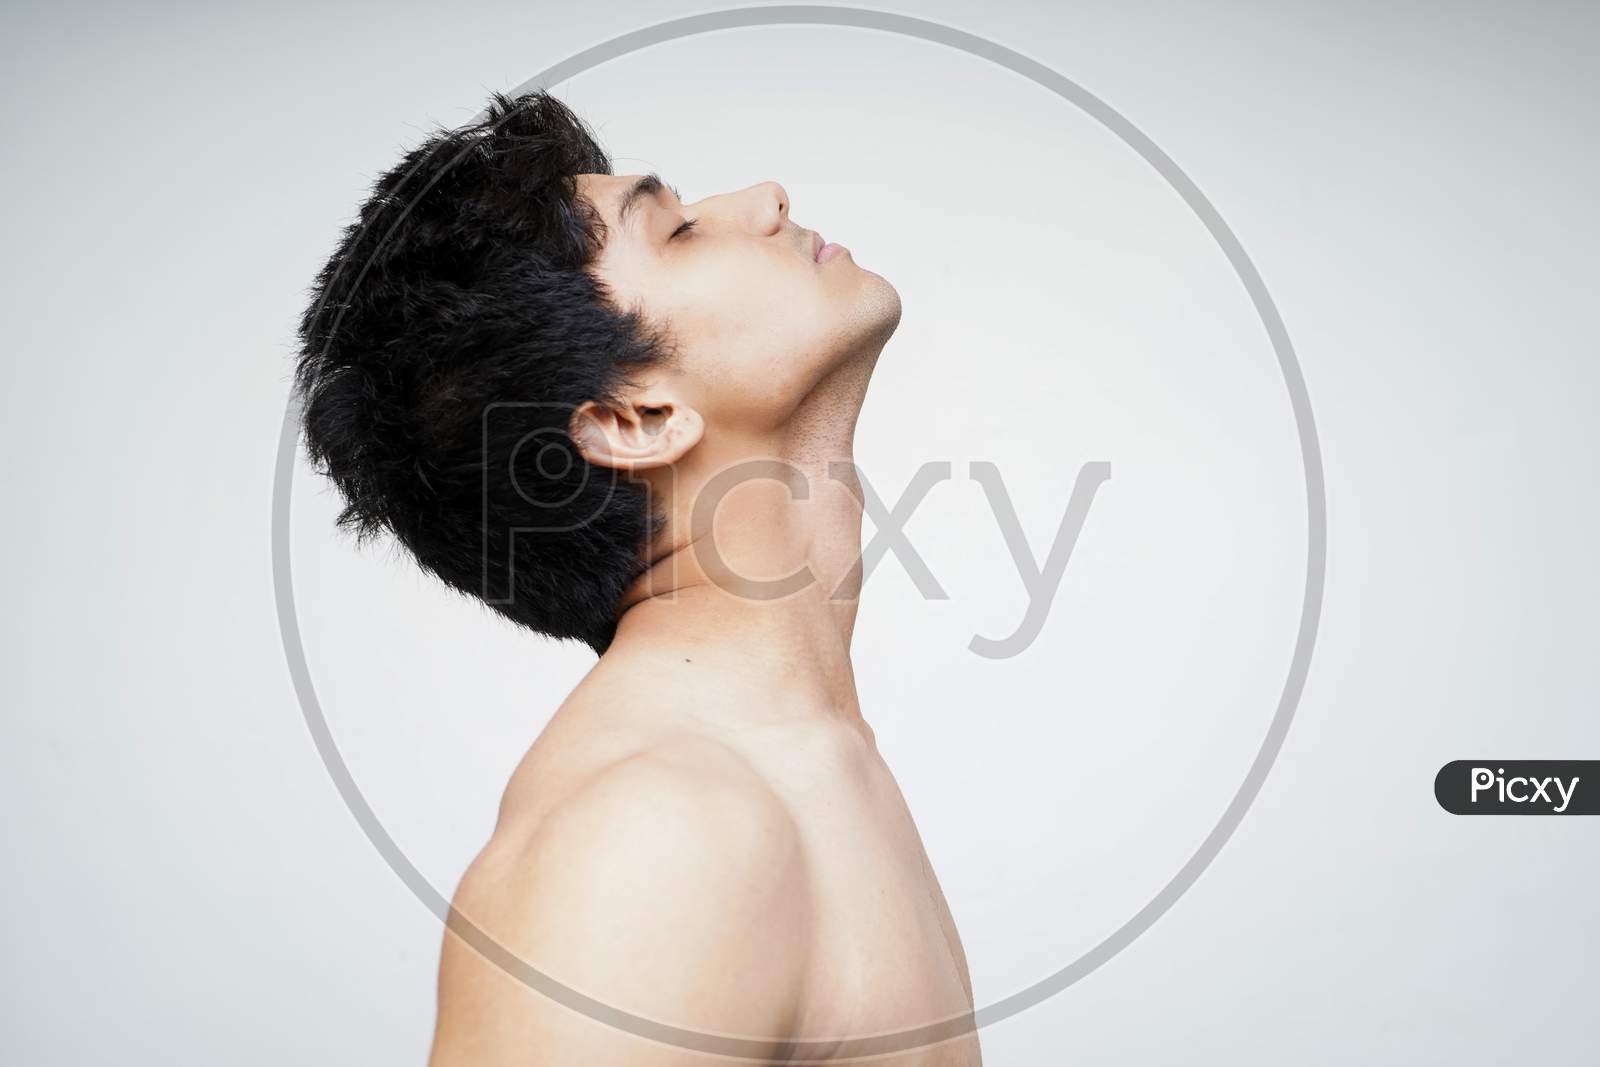 Sensual And Thoughtful. Portrait Of Handsome Shirtless Young Indian Male